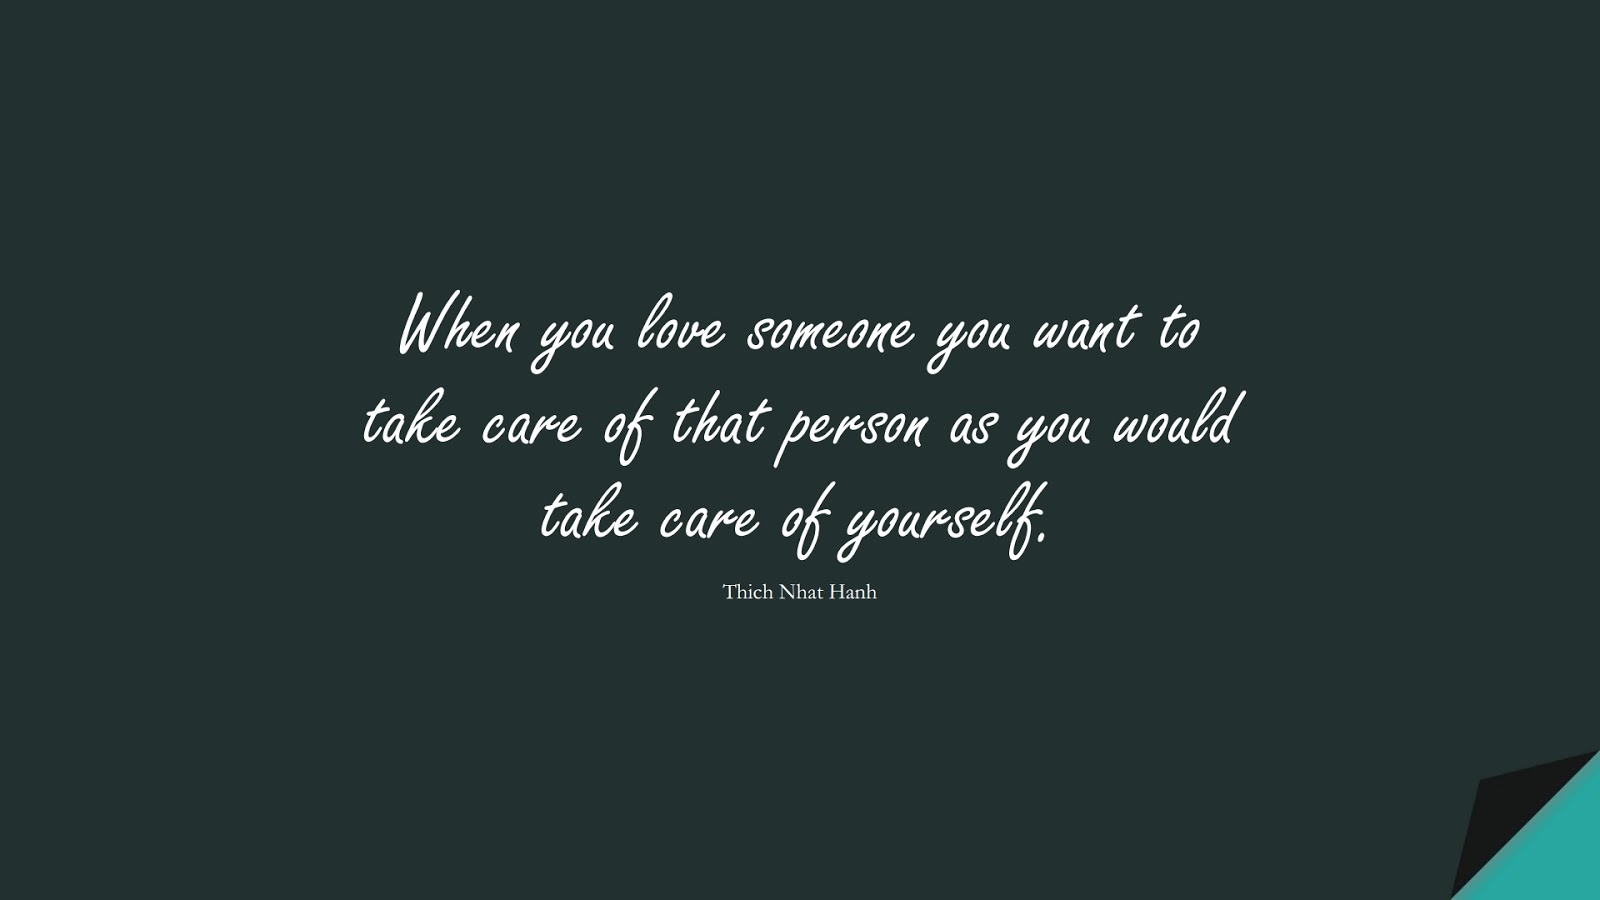 When you love someone you want to take care of that person as you would take care of yourself. (Thich Nhat Hanh);  #LoveYourselfQuotes